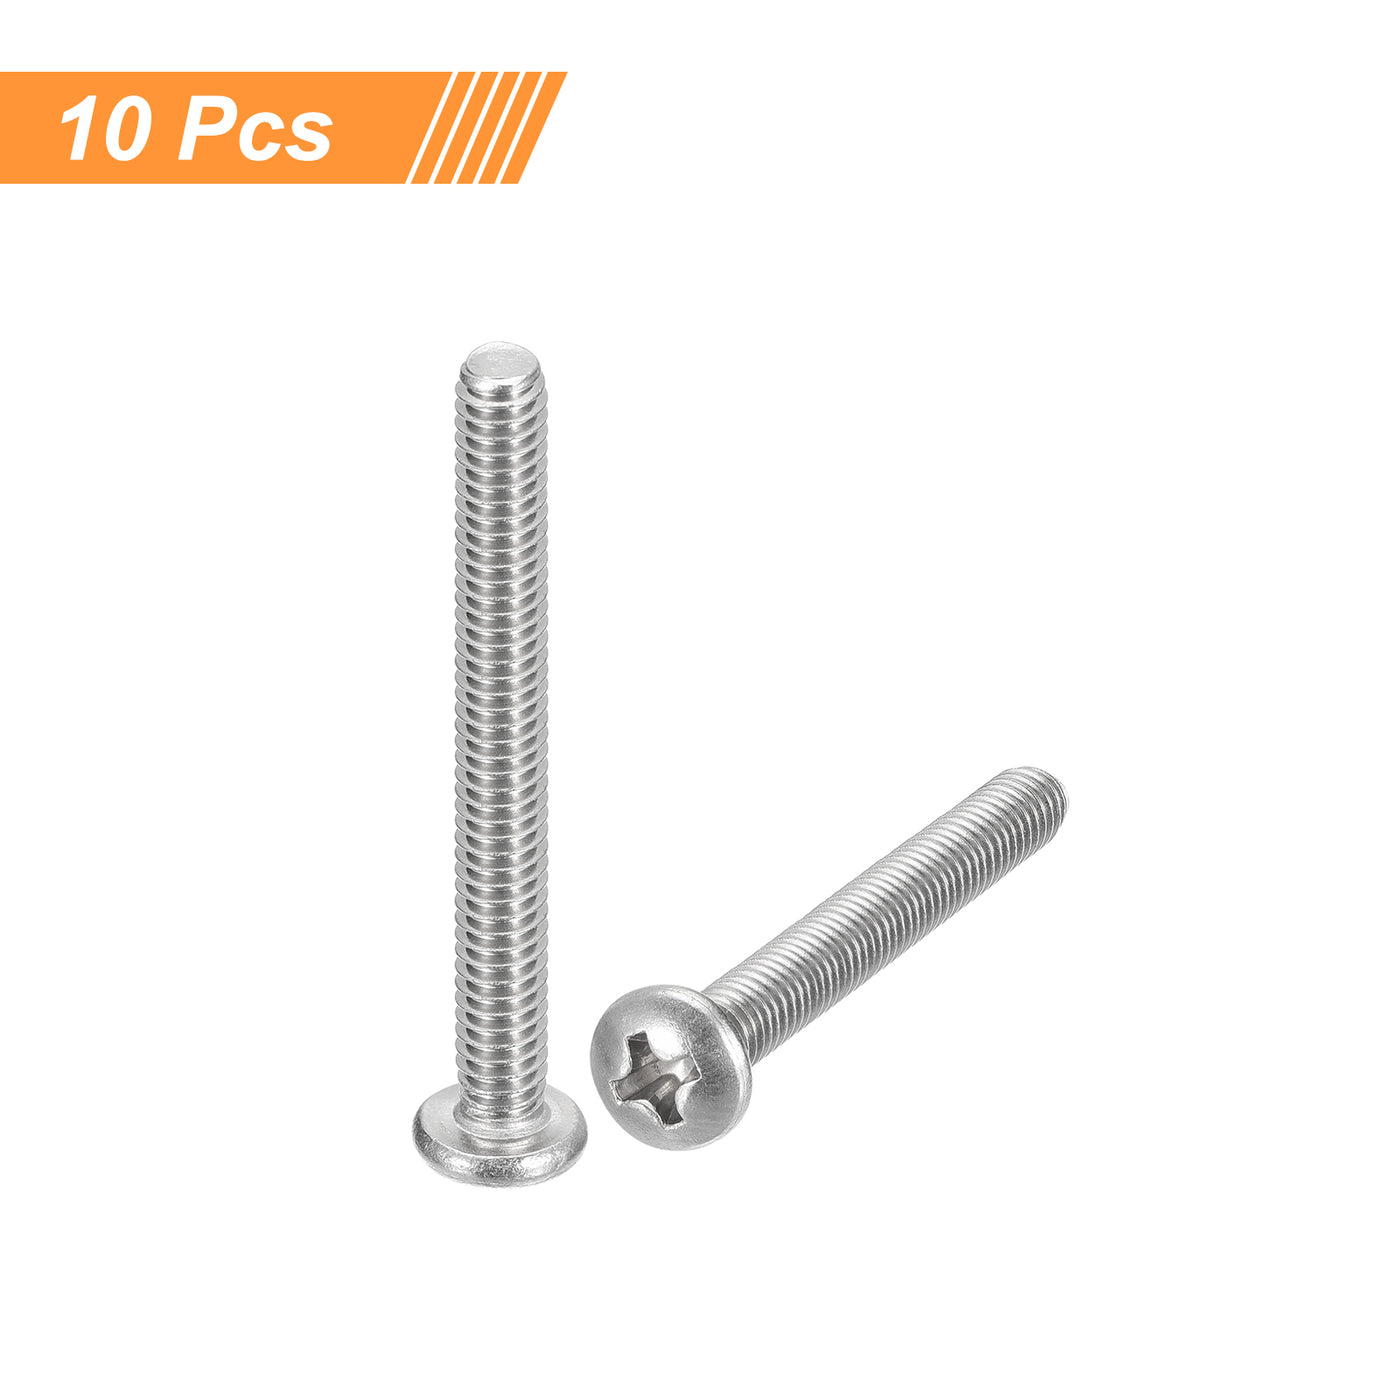 uxcell Uxcell #8-32x3" Pan Head Machine Screws, Stainless Steel 18-8 Screw, Pack of 10